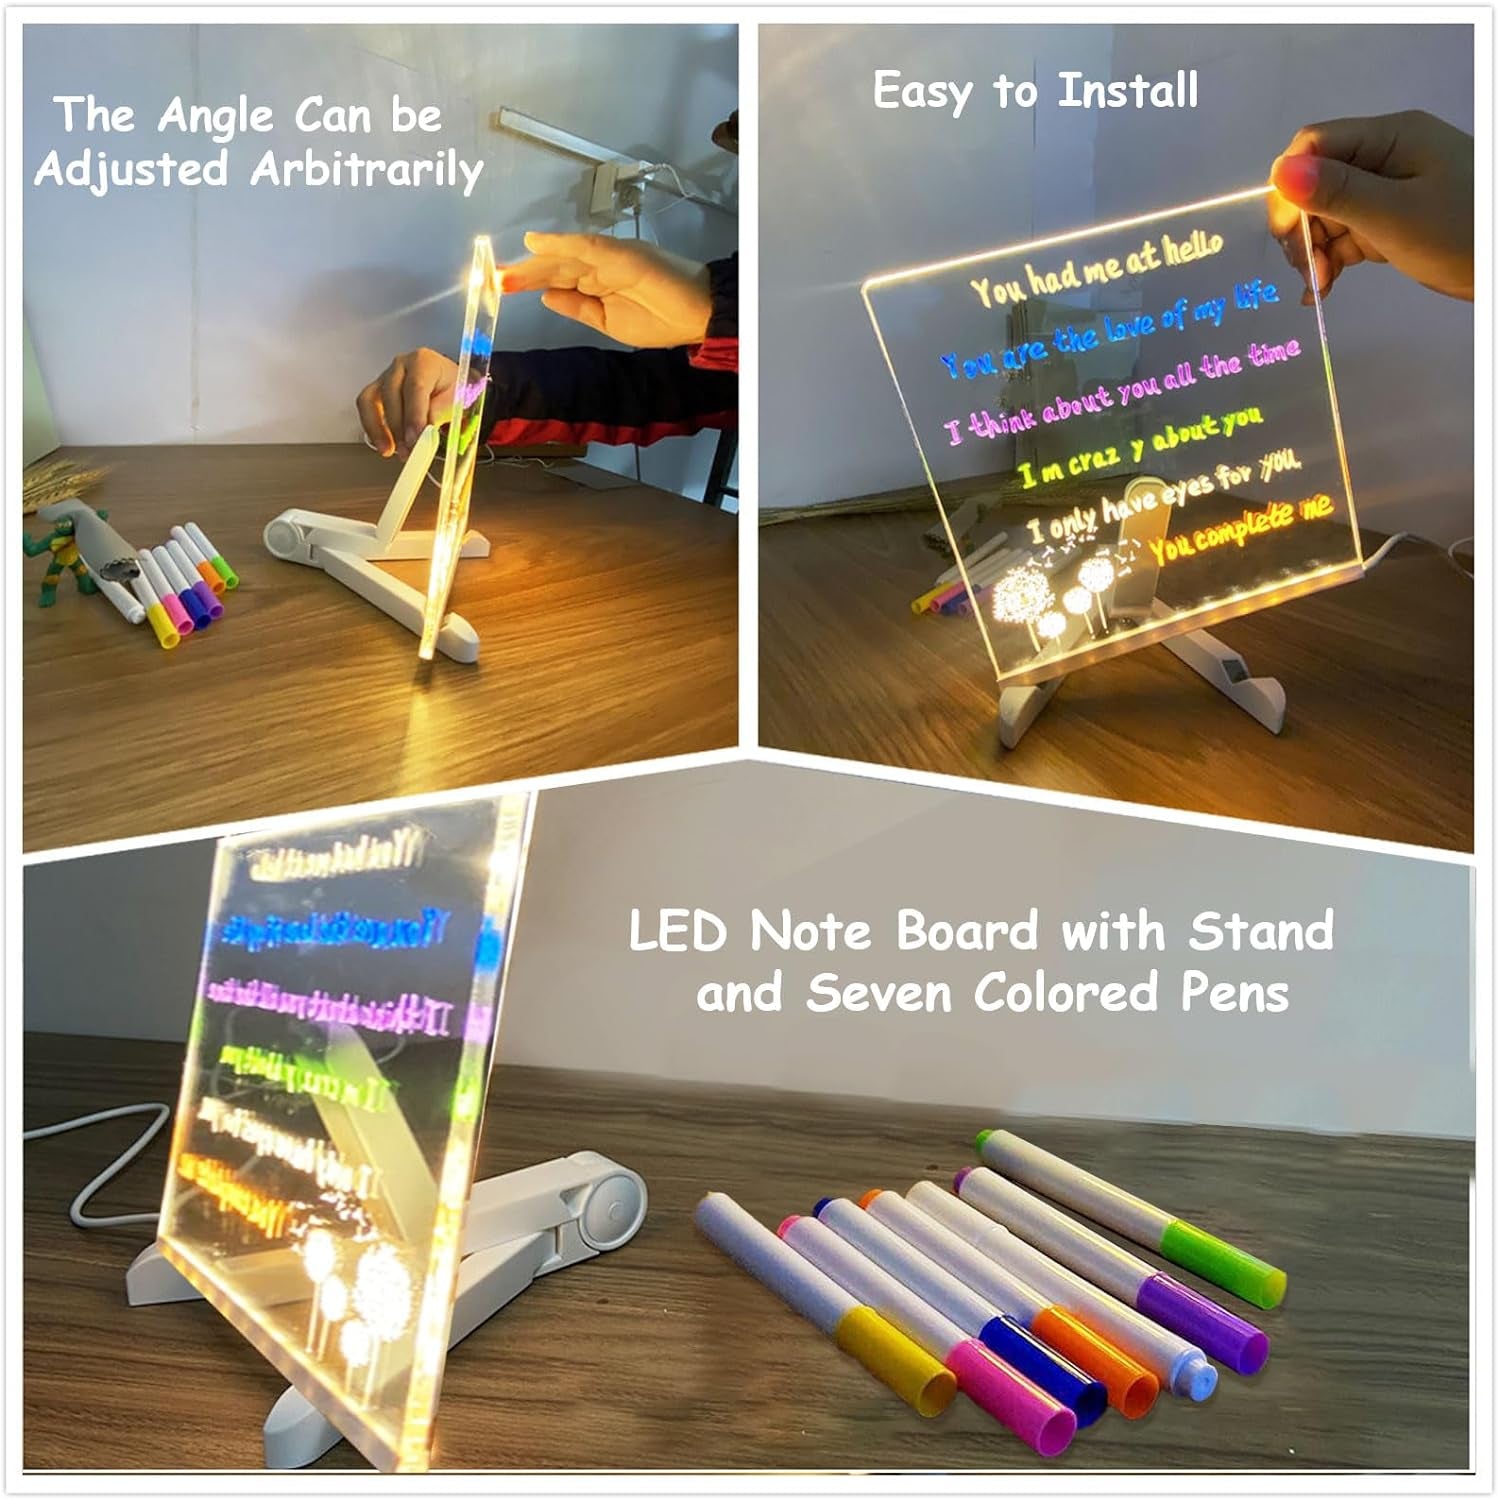 LED Note Board with Colors, Acrylic Dry Erase Board with Light, Acrylic LED Writing Board, Light up Dry Erase Board with Stand as a Glow Memo Letter Message Board Note Glass White Board